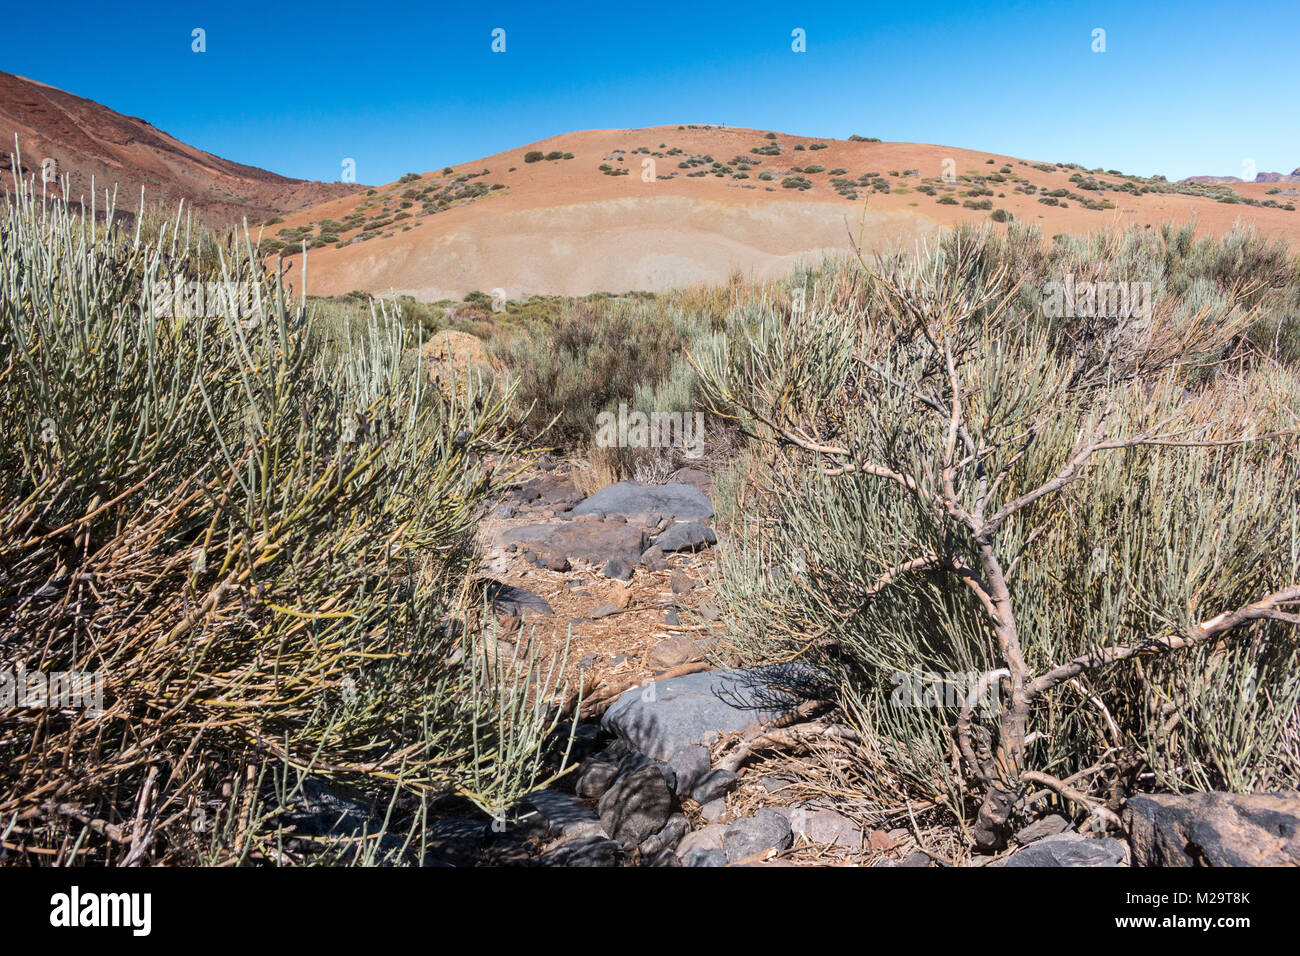 dry bushes and sands hills wasteland Stock Photo